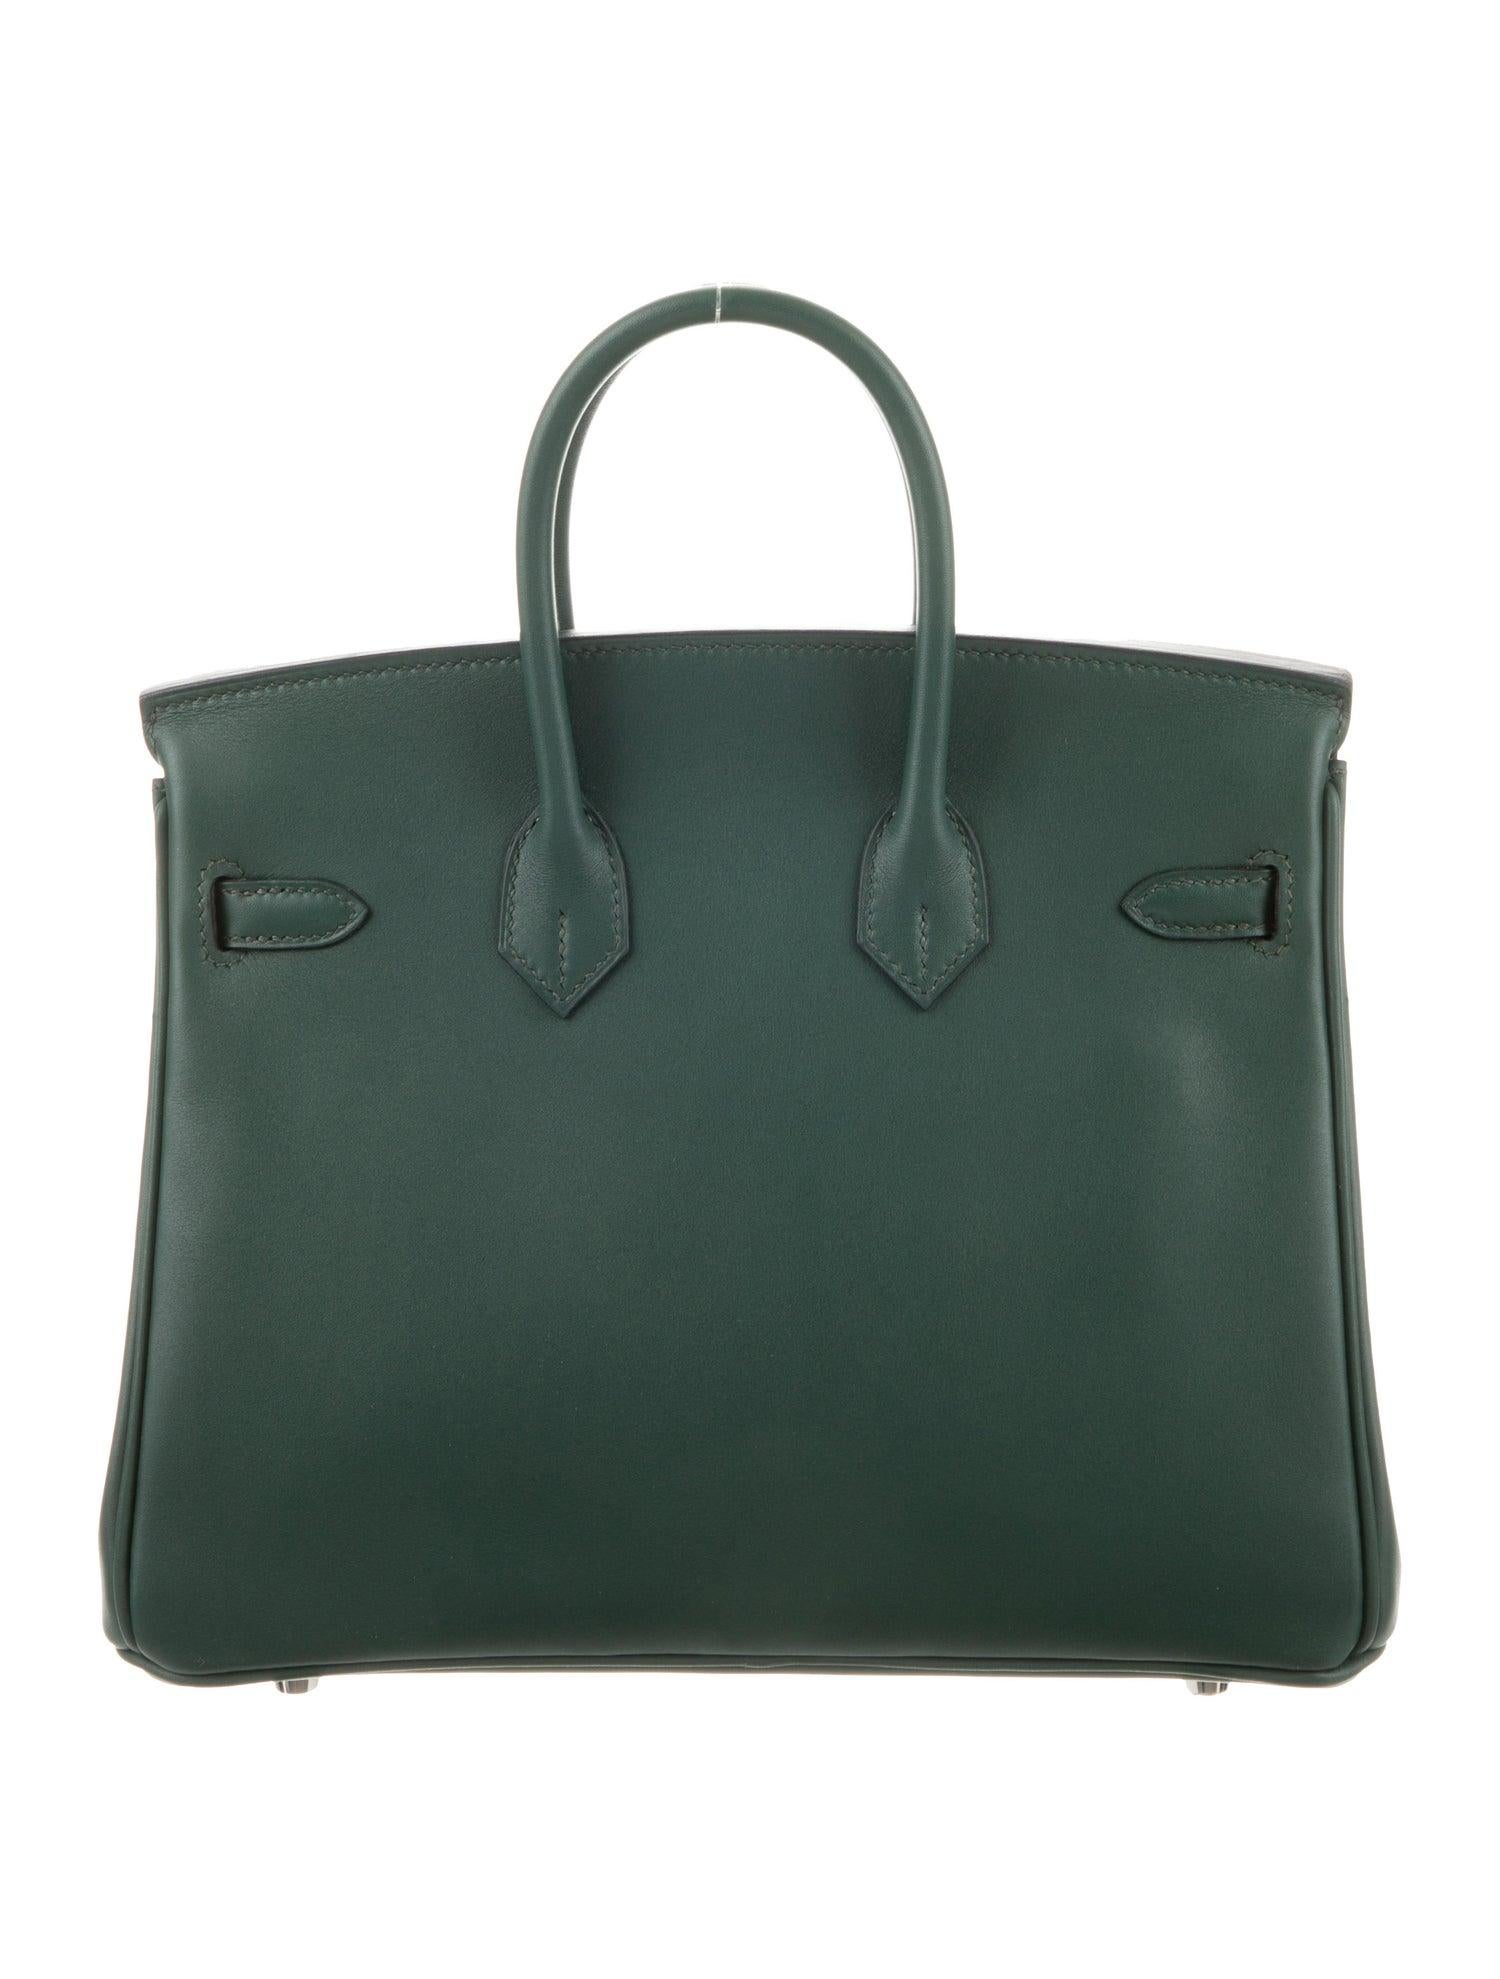 Hermes NEW Birkin 25 Green Leather Top Handle Tote Satchel Shoulder Bag in Box

Leather
Palladium-plated hardware
Leather lining
Turn-lock closure
Made in France
Date code present
Top Handle 2.5